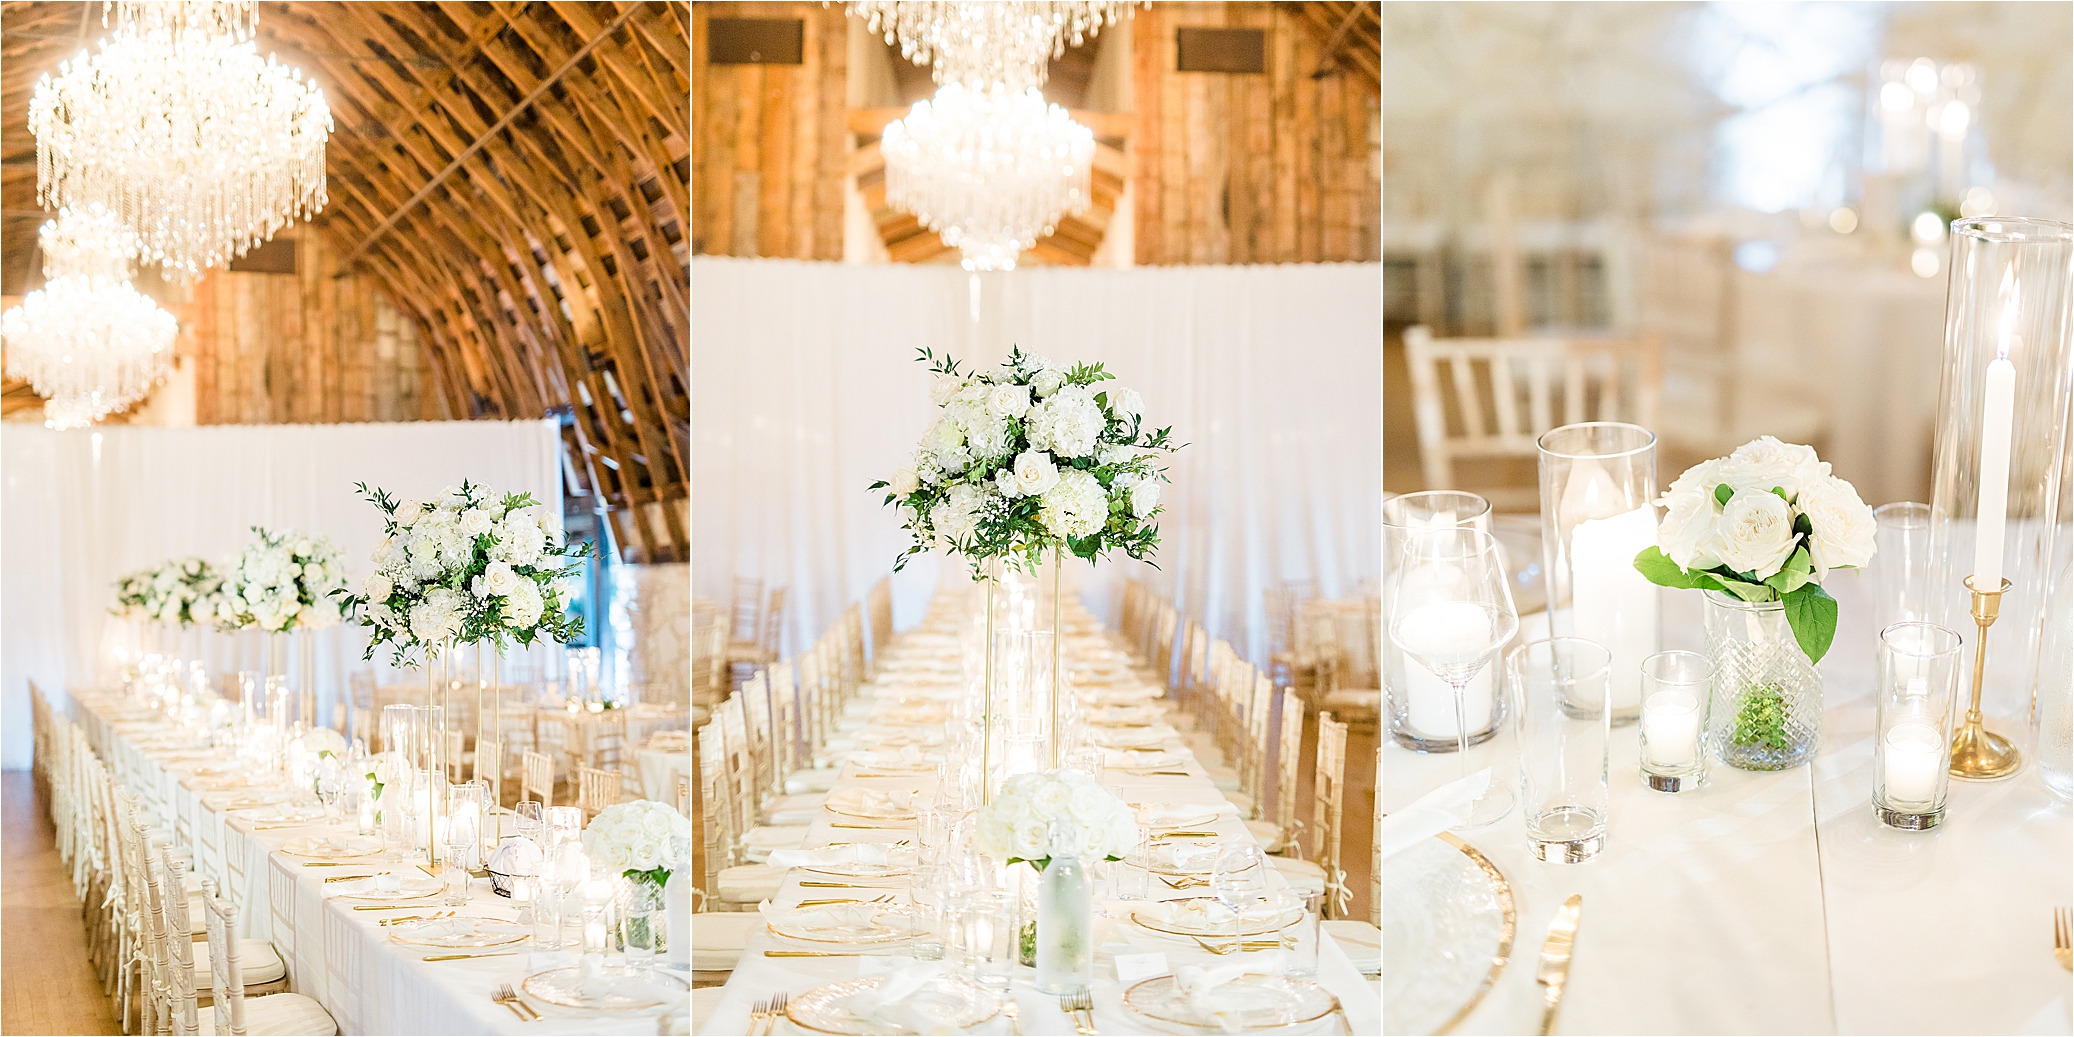 White flowers, greenery, chandeliers and long tables inside a brown barn venue, Brodie Homestead in Austin Texas with wedding photographer Jillian Hogan